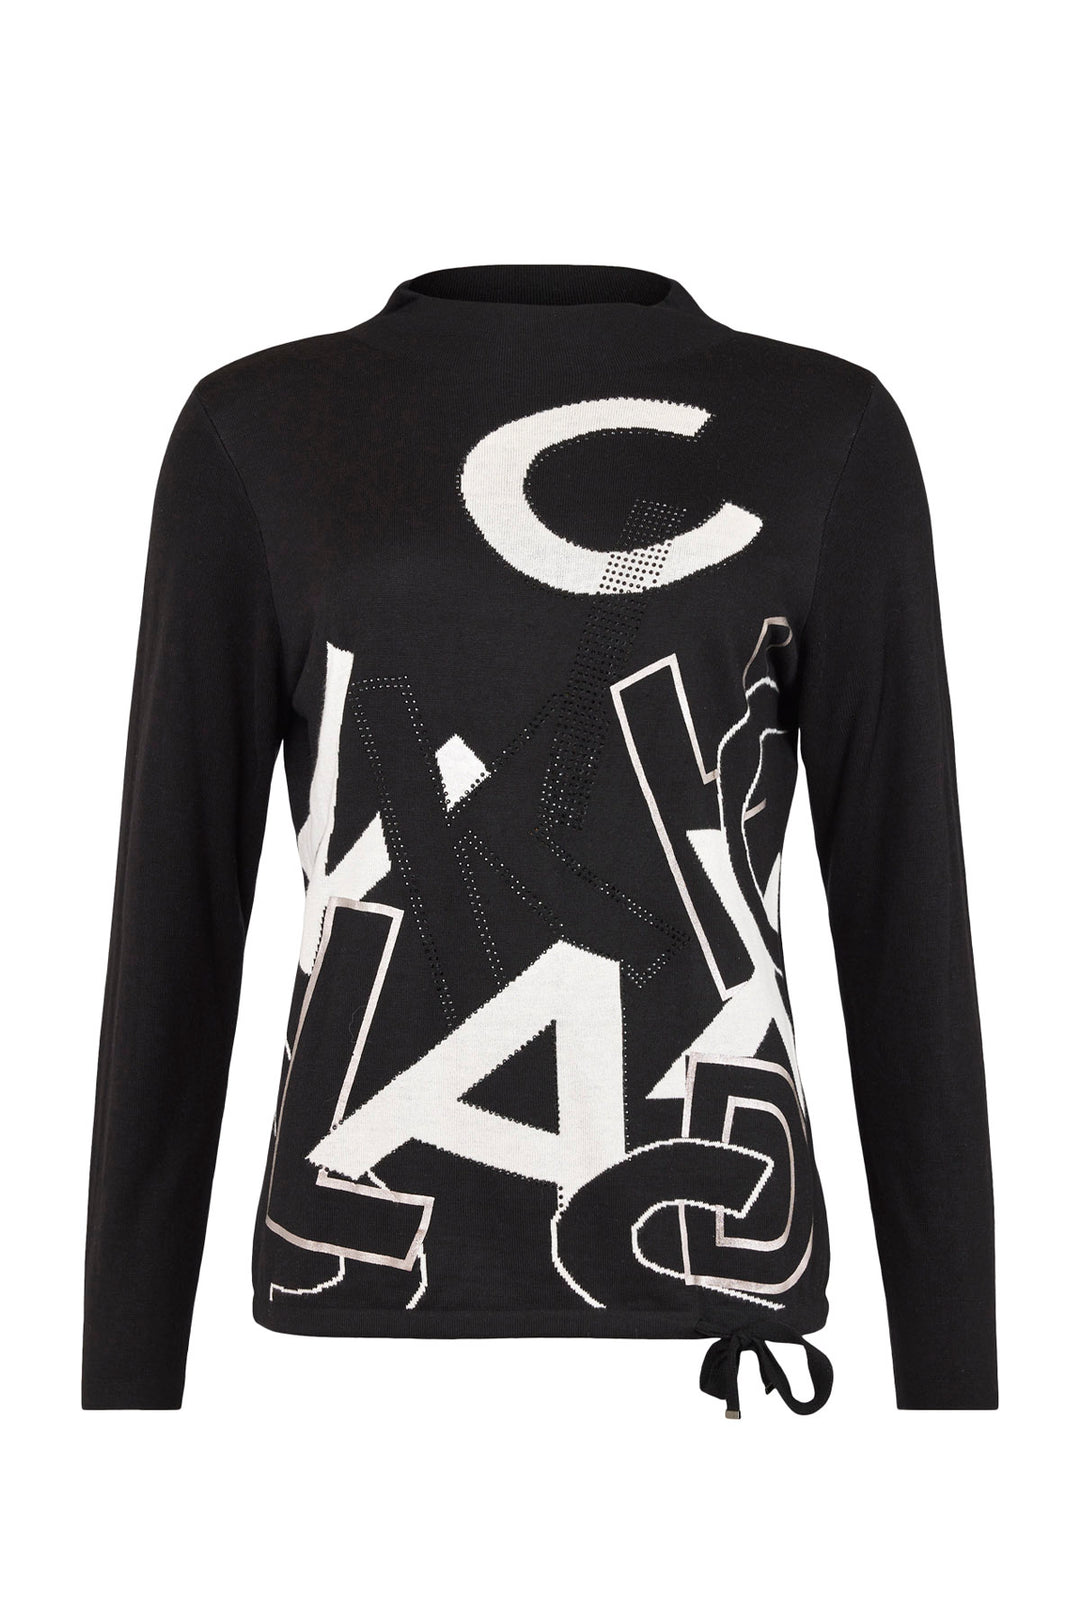 "I'cona Letter Print Sweater with Diamante Detail - Style 64111-60002-90 (Black / Ivory)"